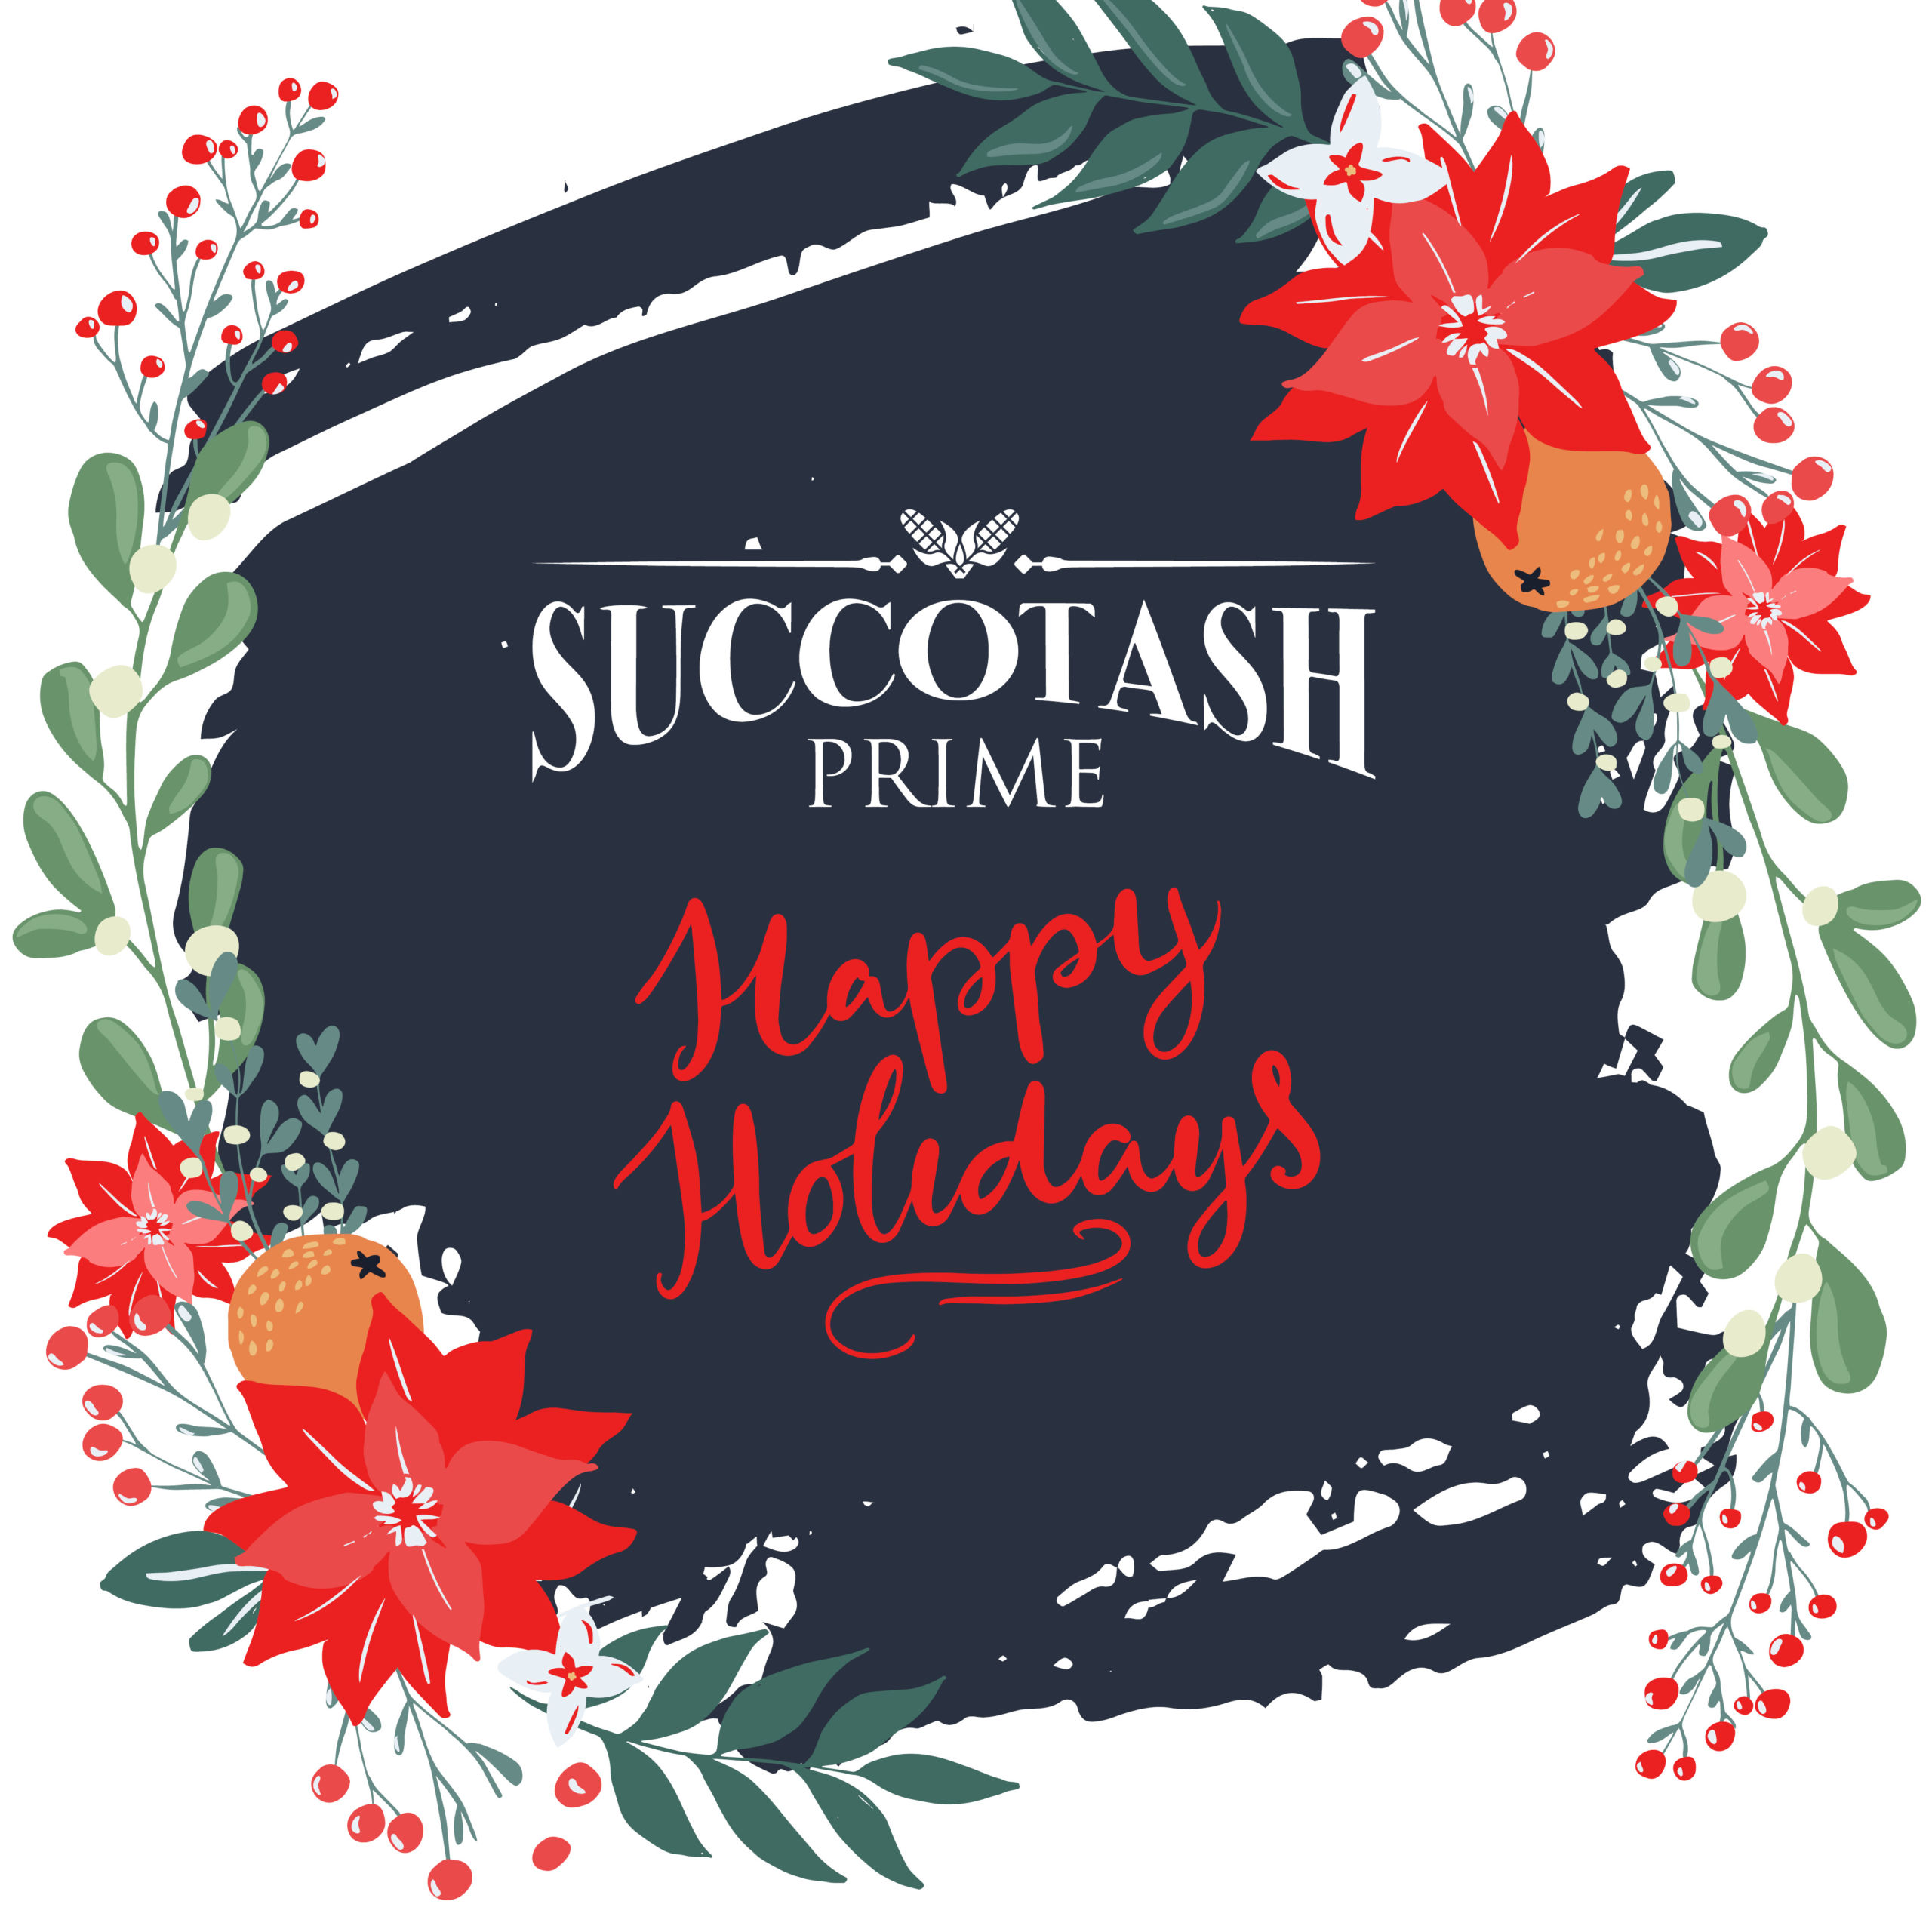 SP Holiday Web Graphic